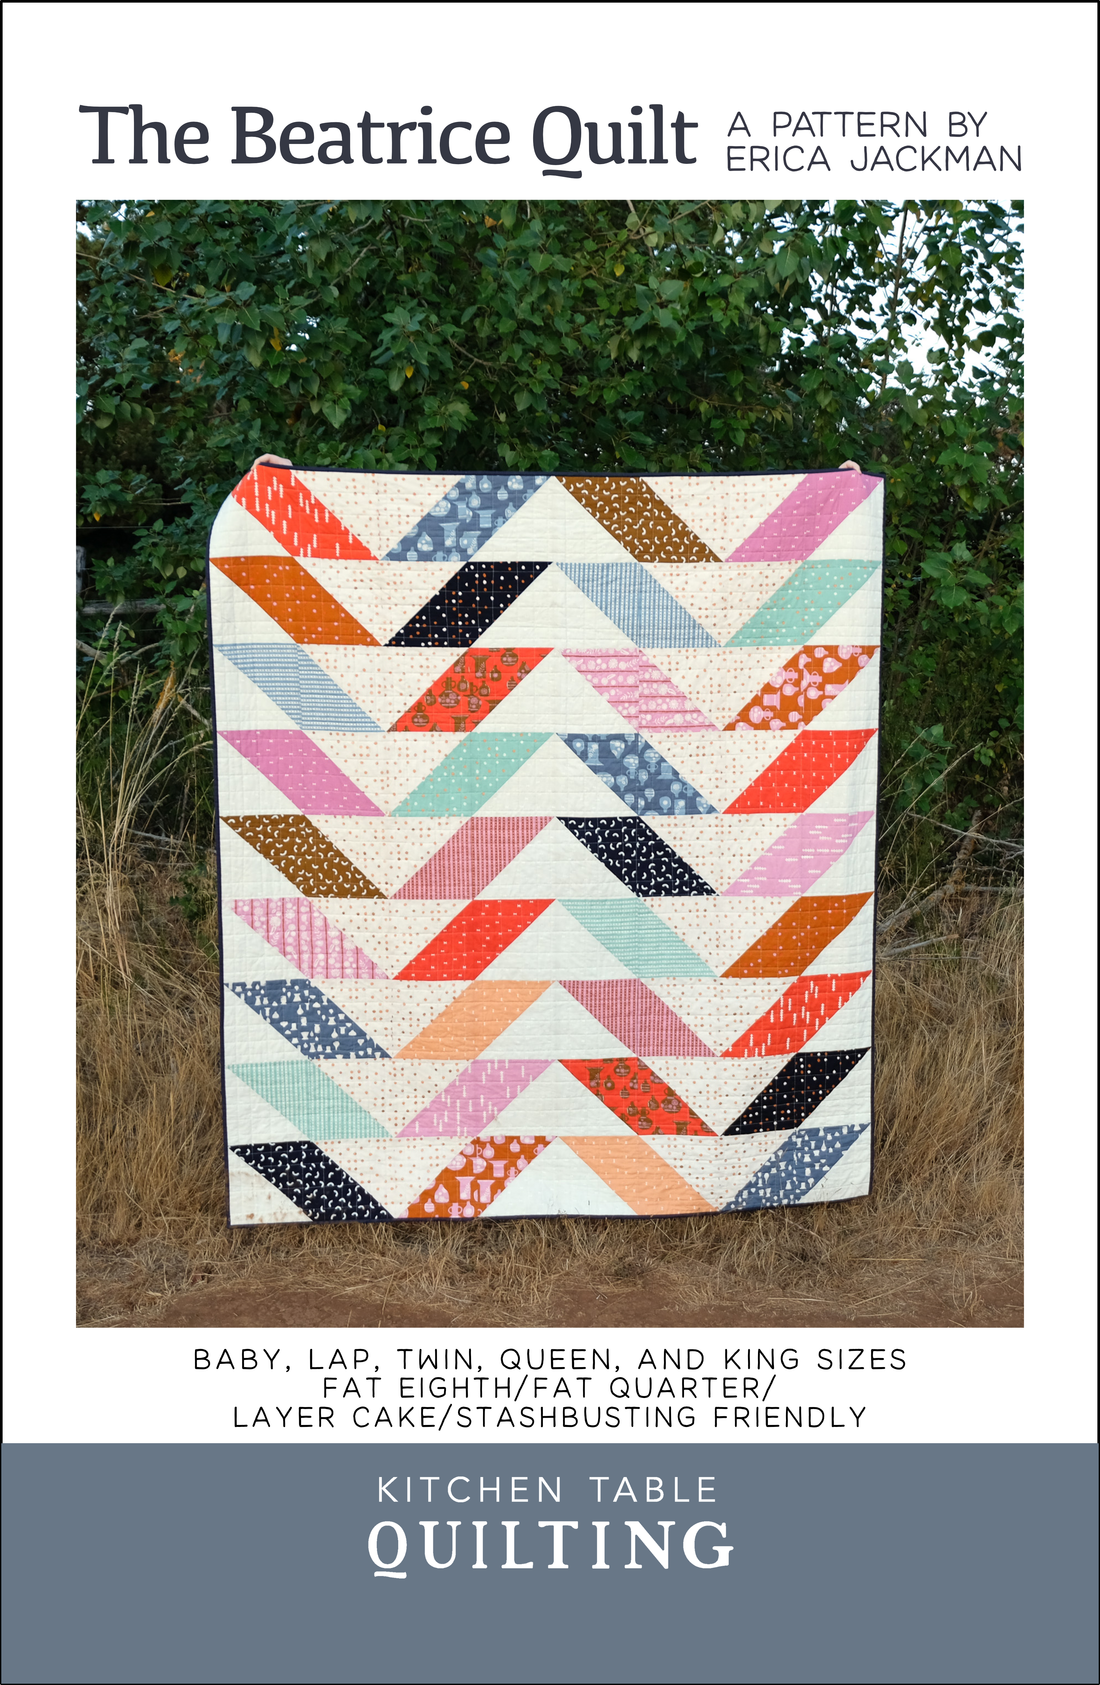 The Beatrice Quilt PDF Pattern